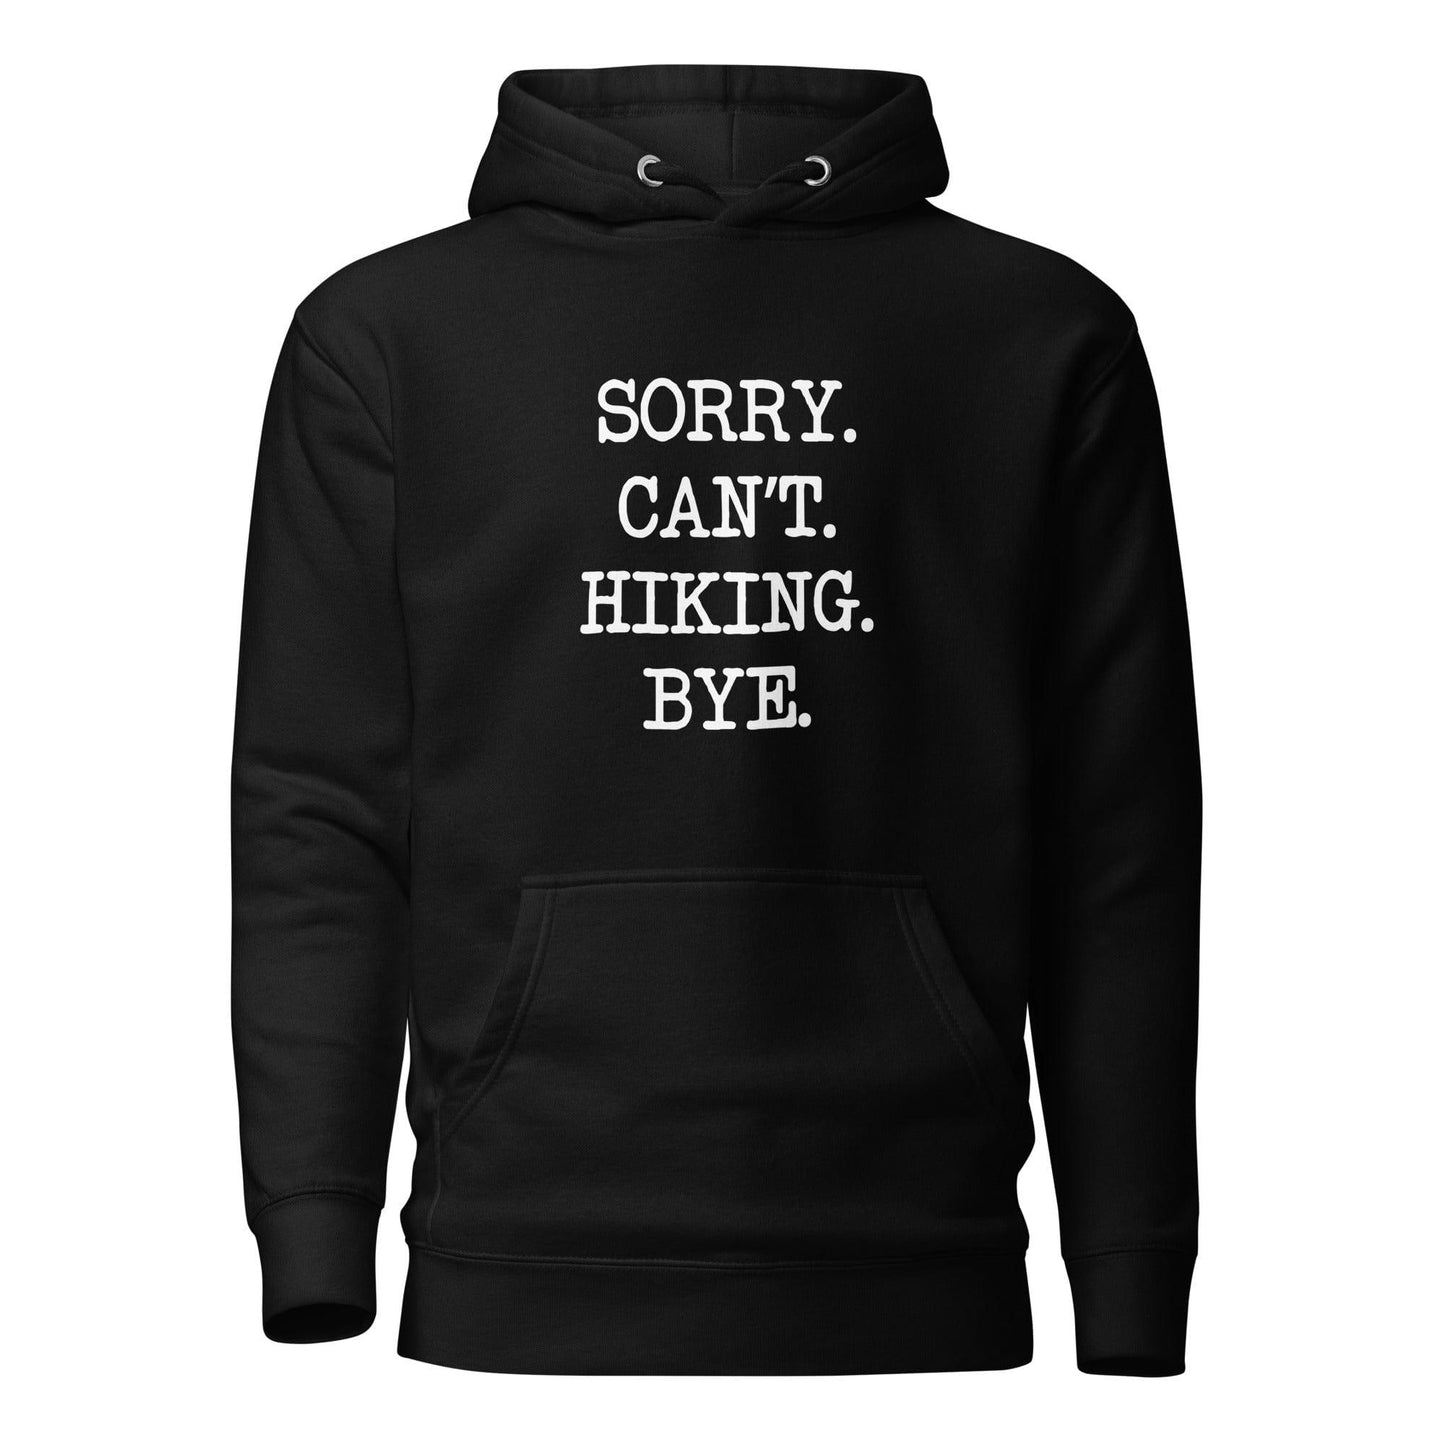 Sorry. Can't. Hiking. Bye. Hoodie - Adventure Threads Company